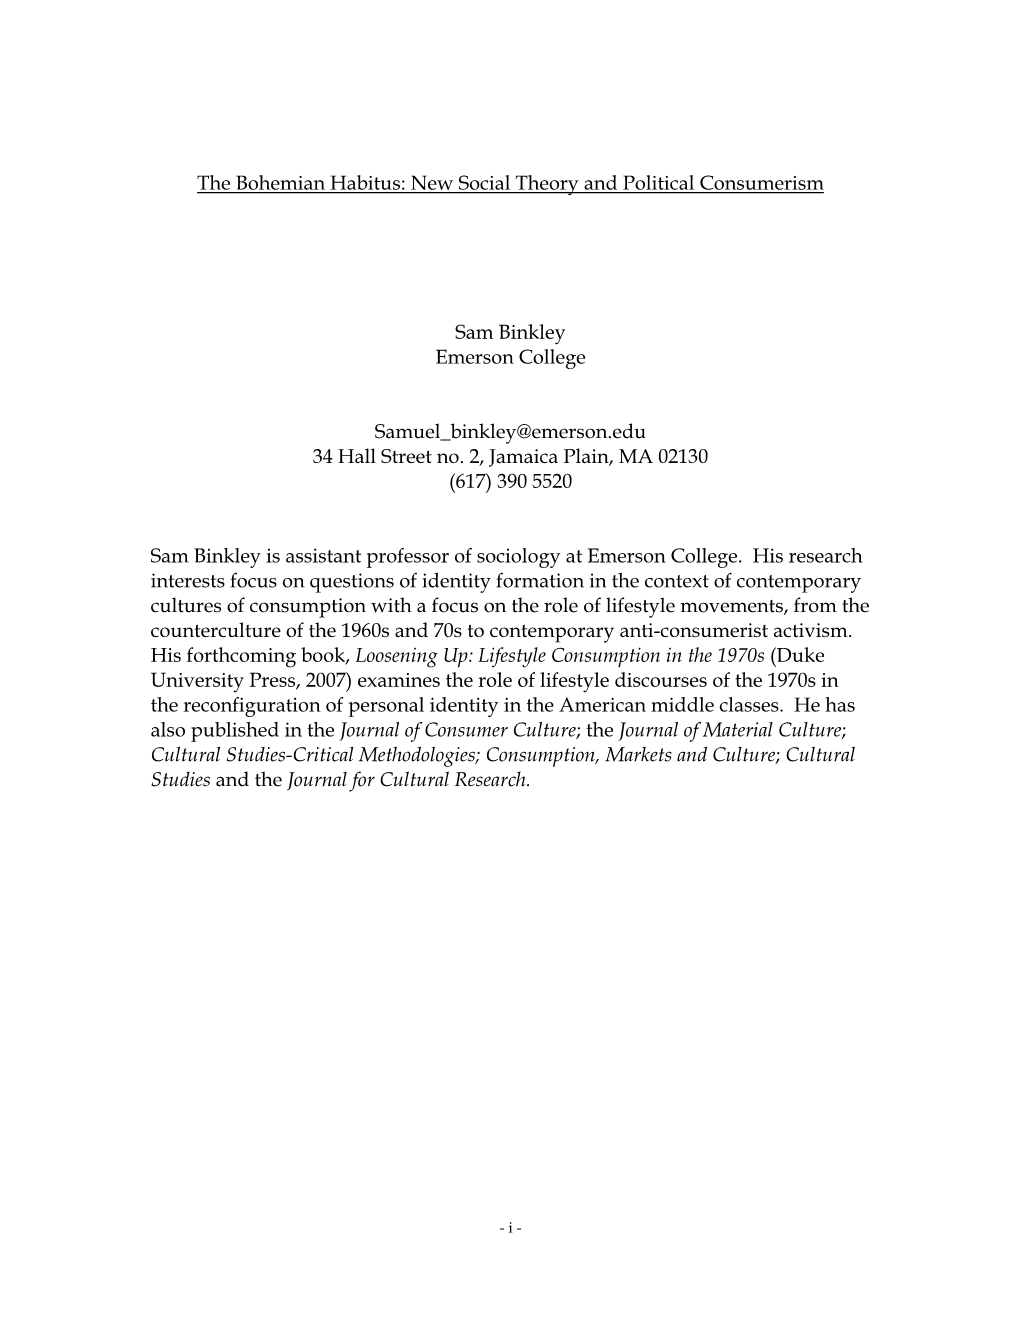 The Bohemian Habitus: New Social Theory and Political Consumerism